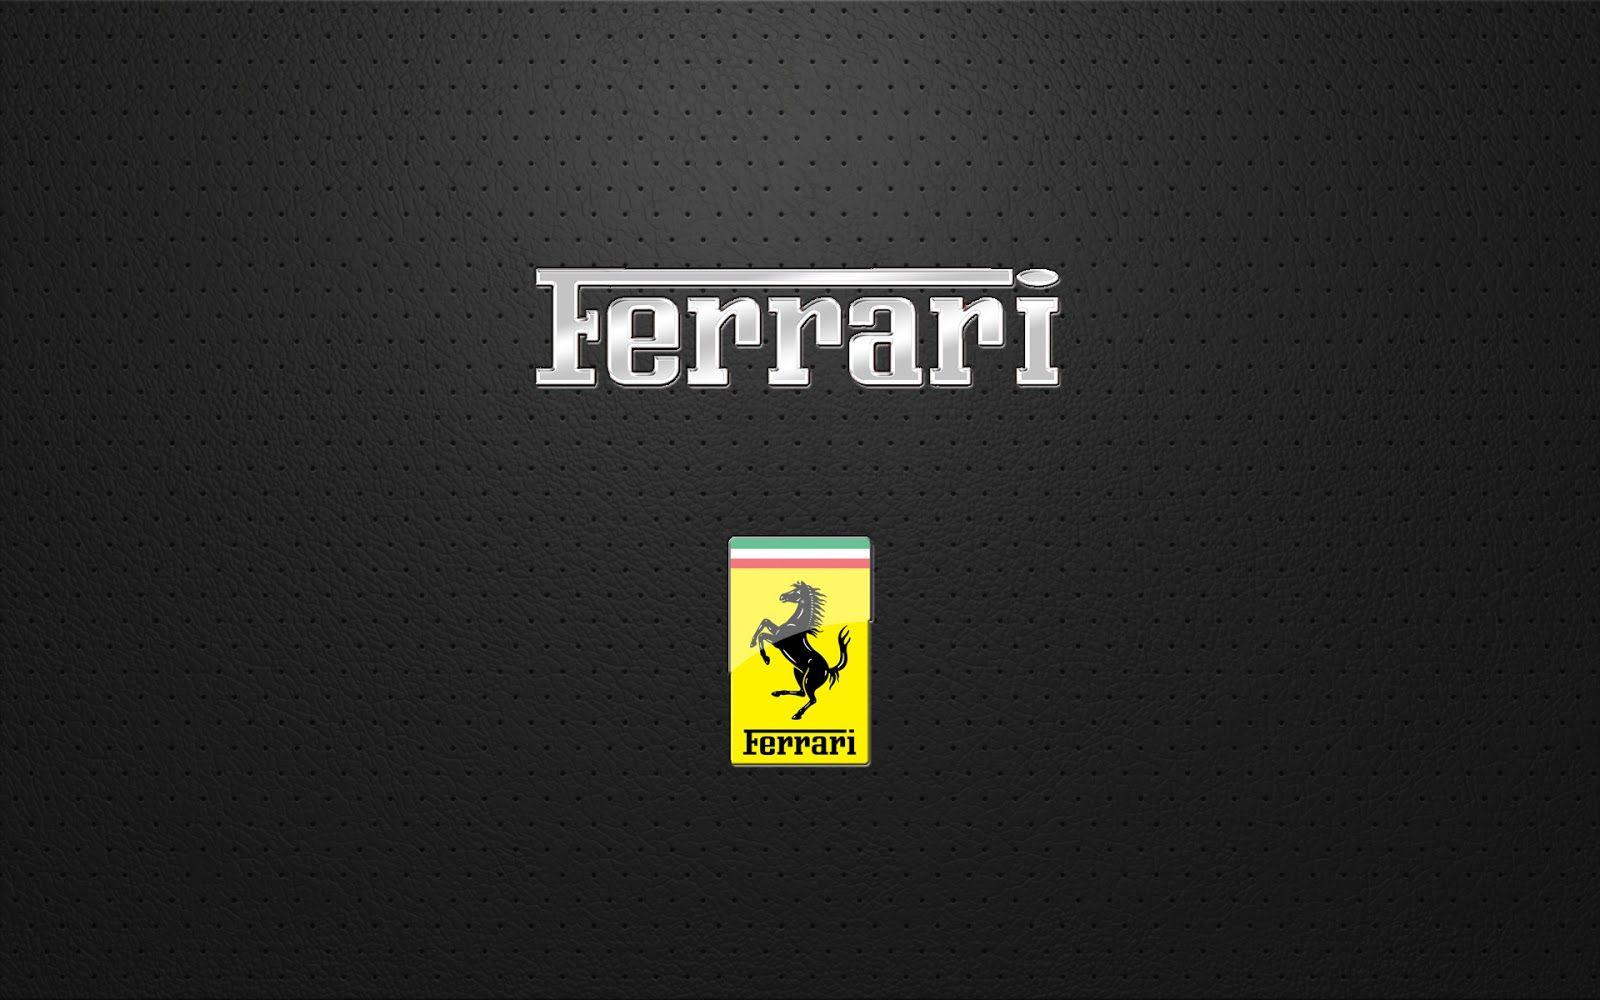 Ferrari Logo - Ferrari Logo, Ferrari Car Symbol Meaning and History. Car Brand